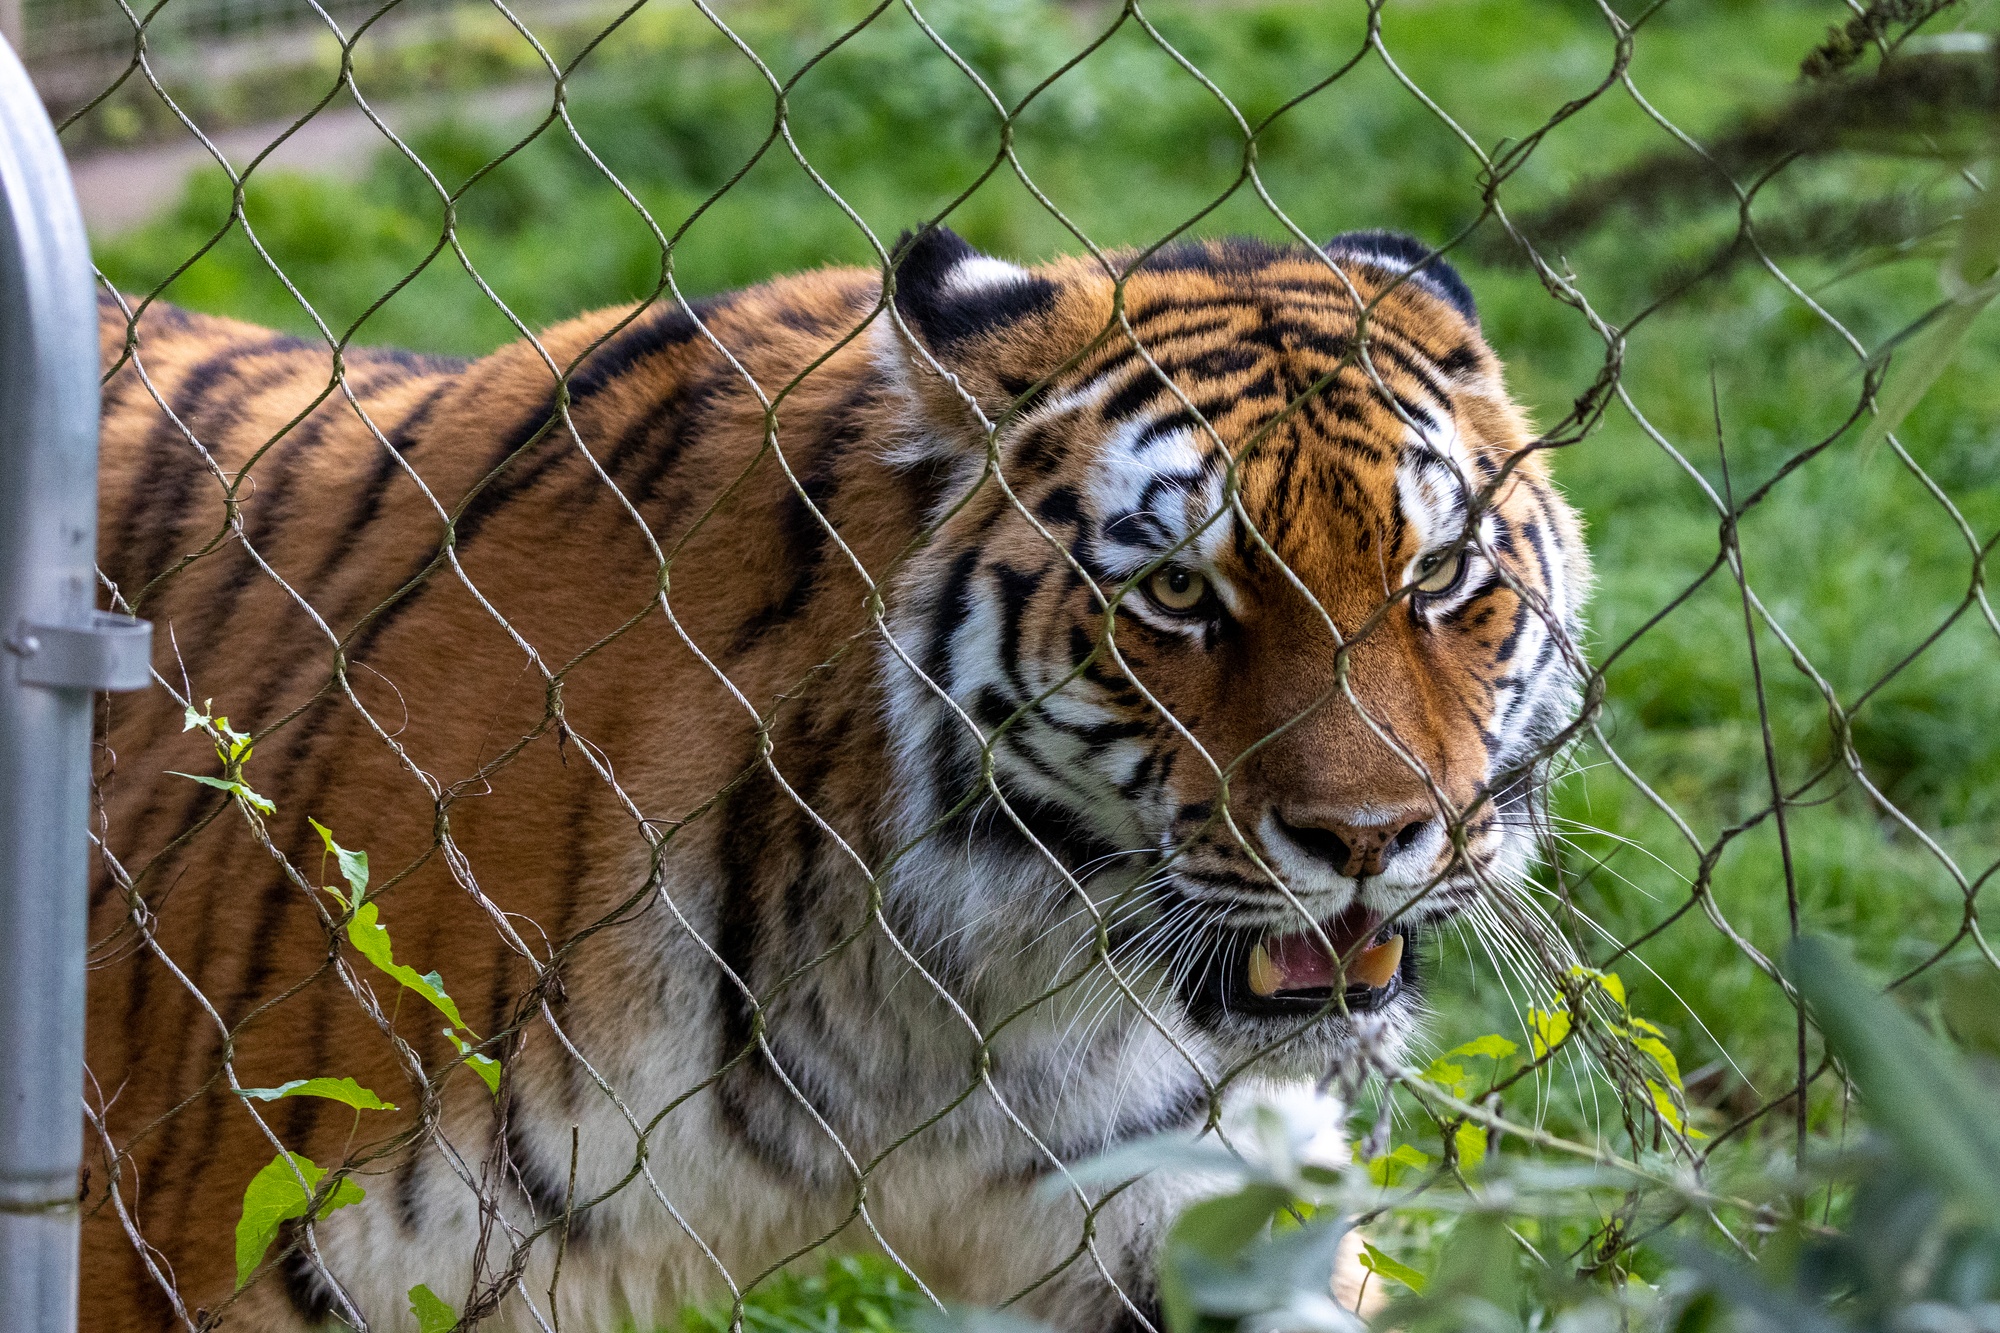 Tiger walking with head down and mouth open behind fence looking to right of camera